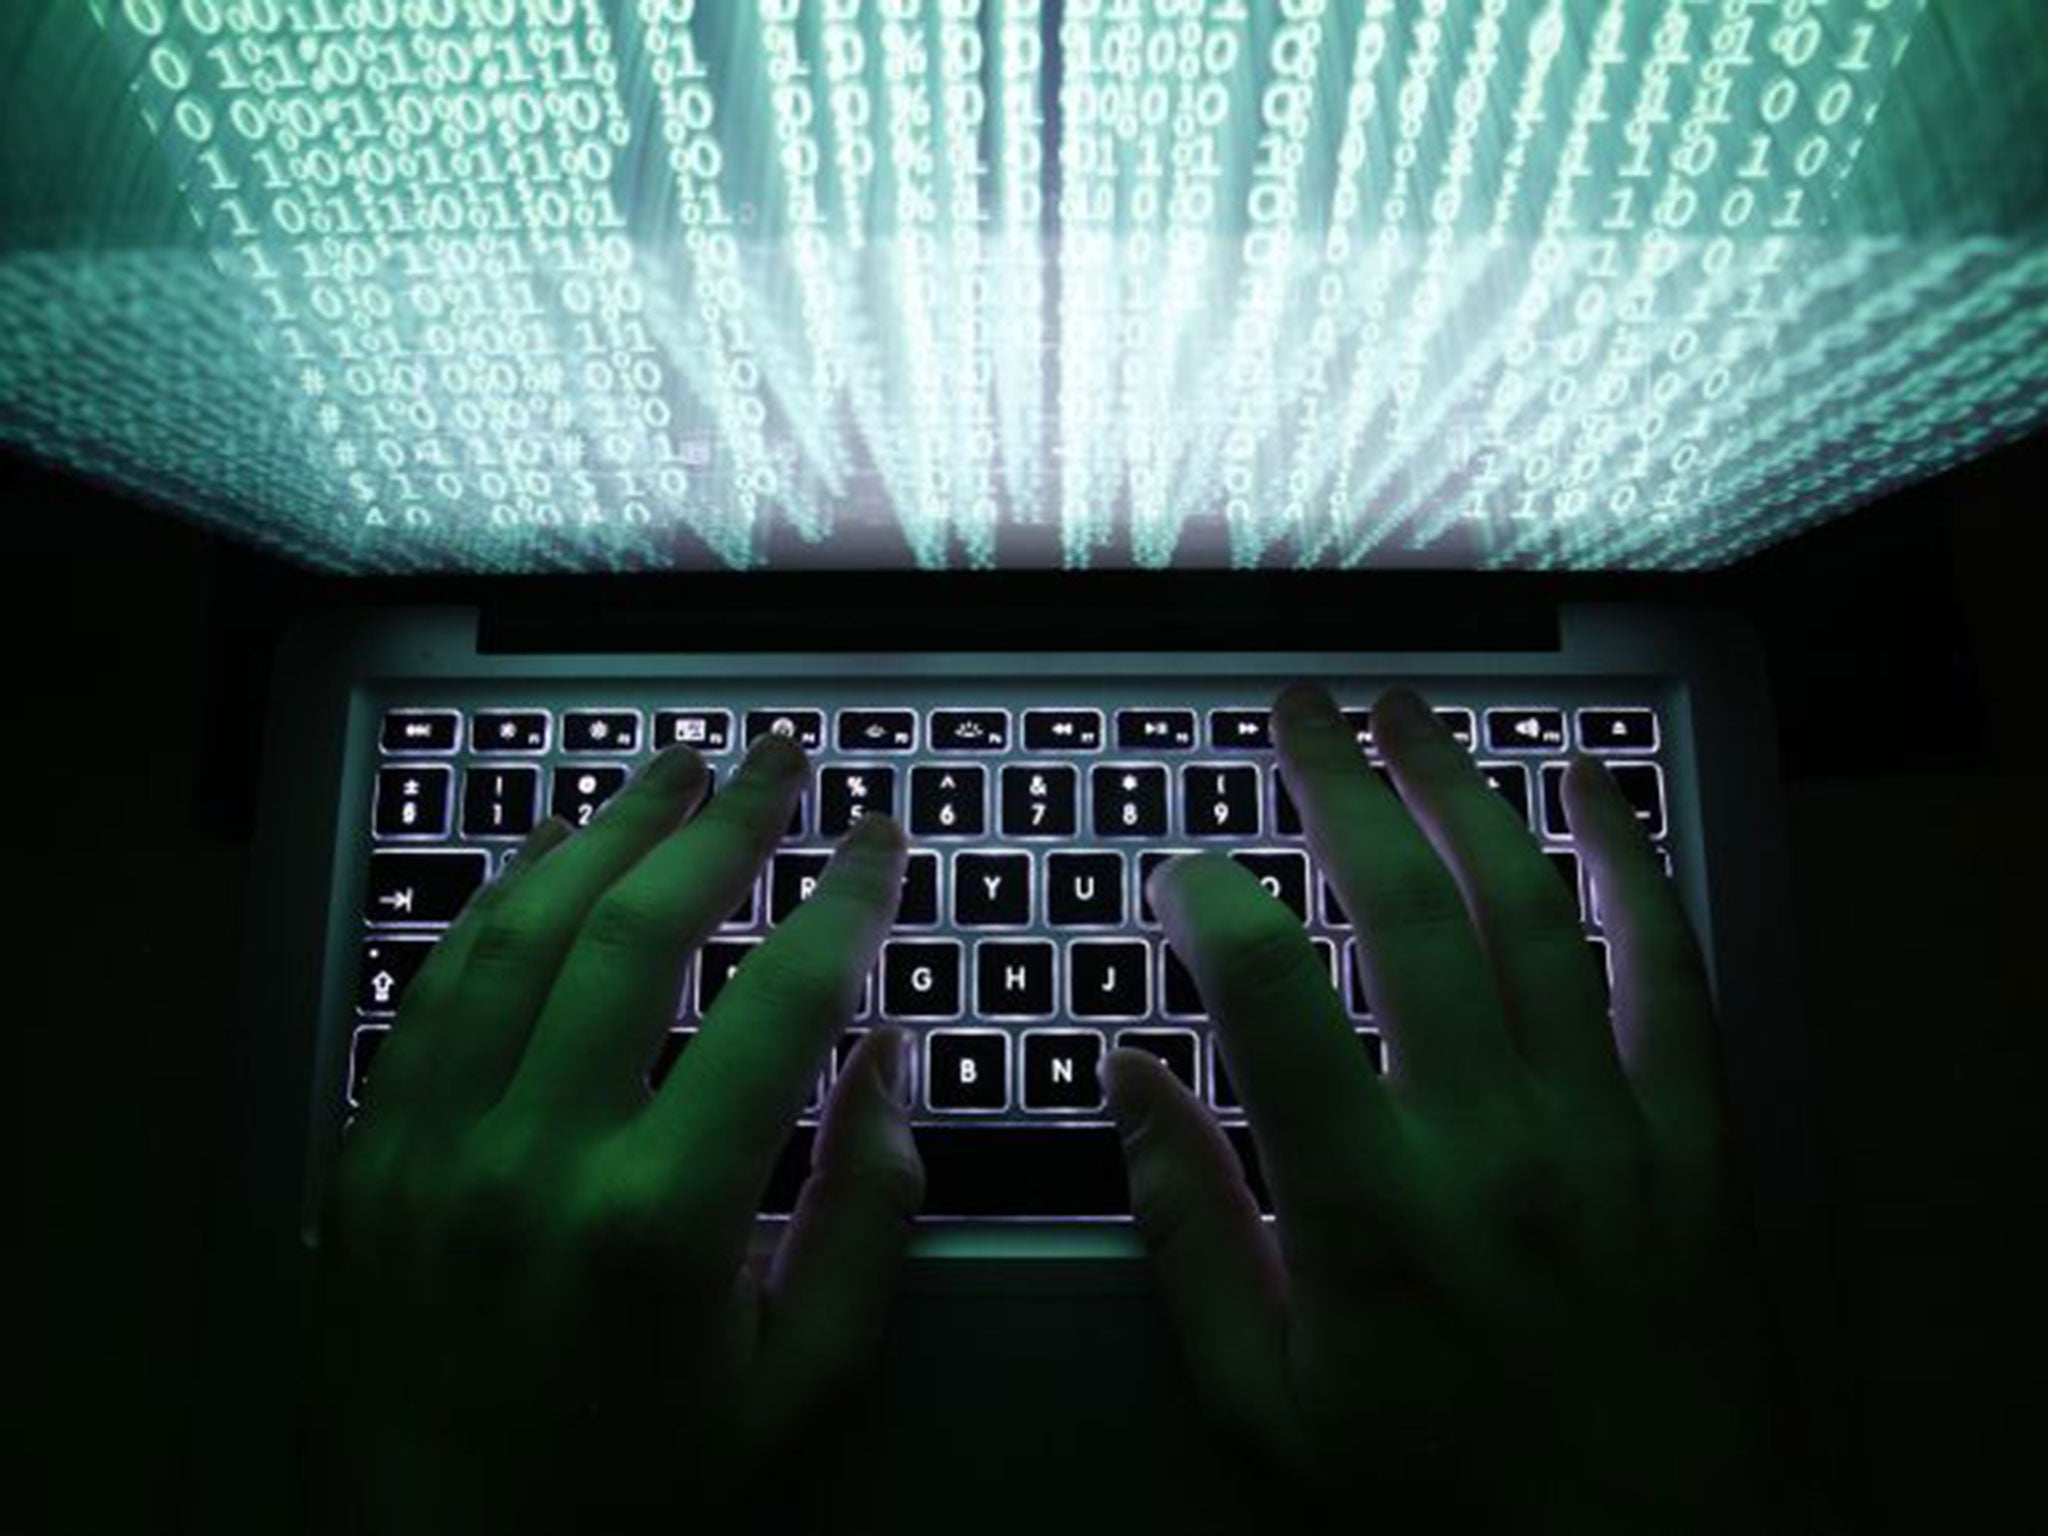 Three years ago spyware cost around £200 – now it’s £35